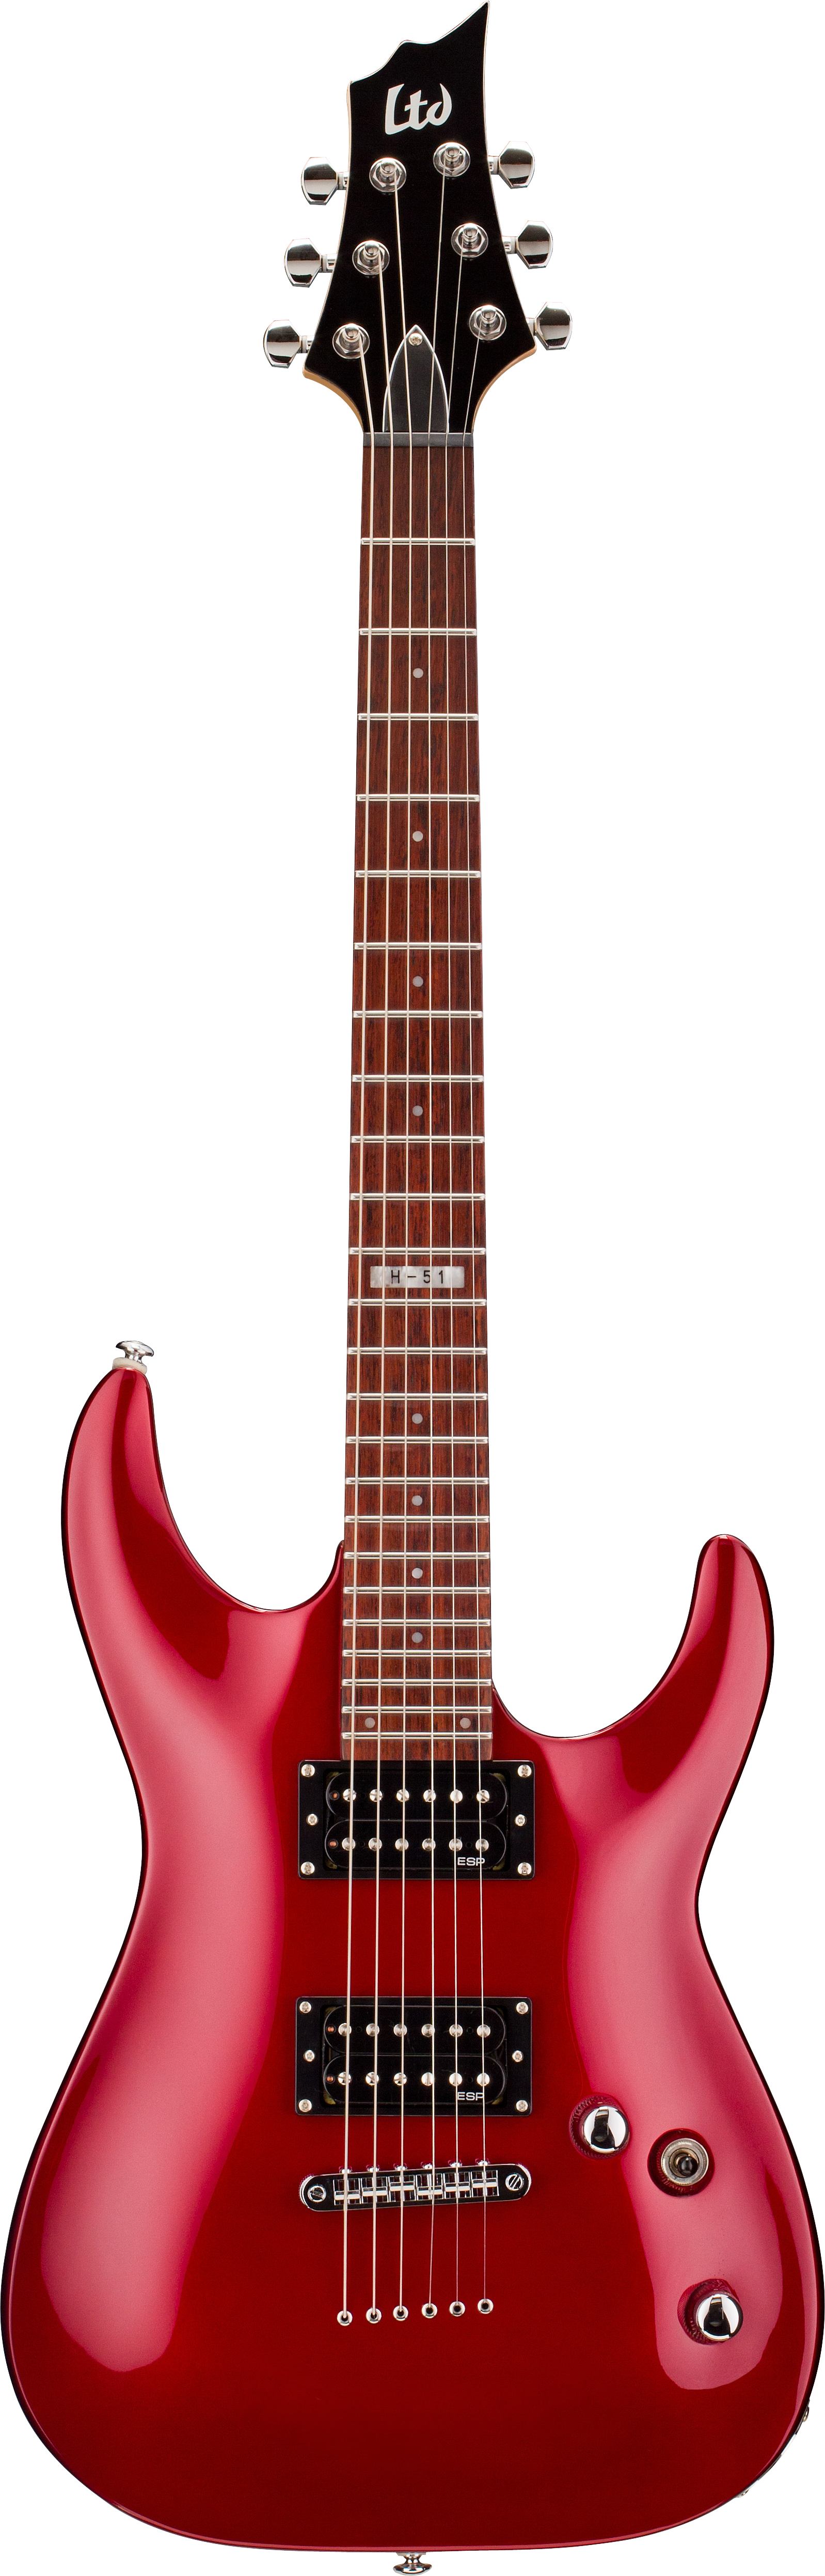 Guitar Electric Red Download Free Image PNG Image